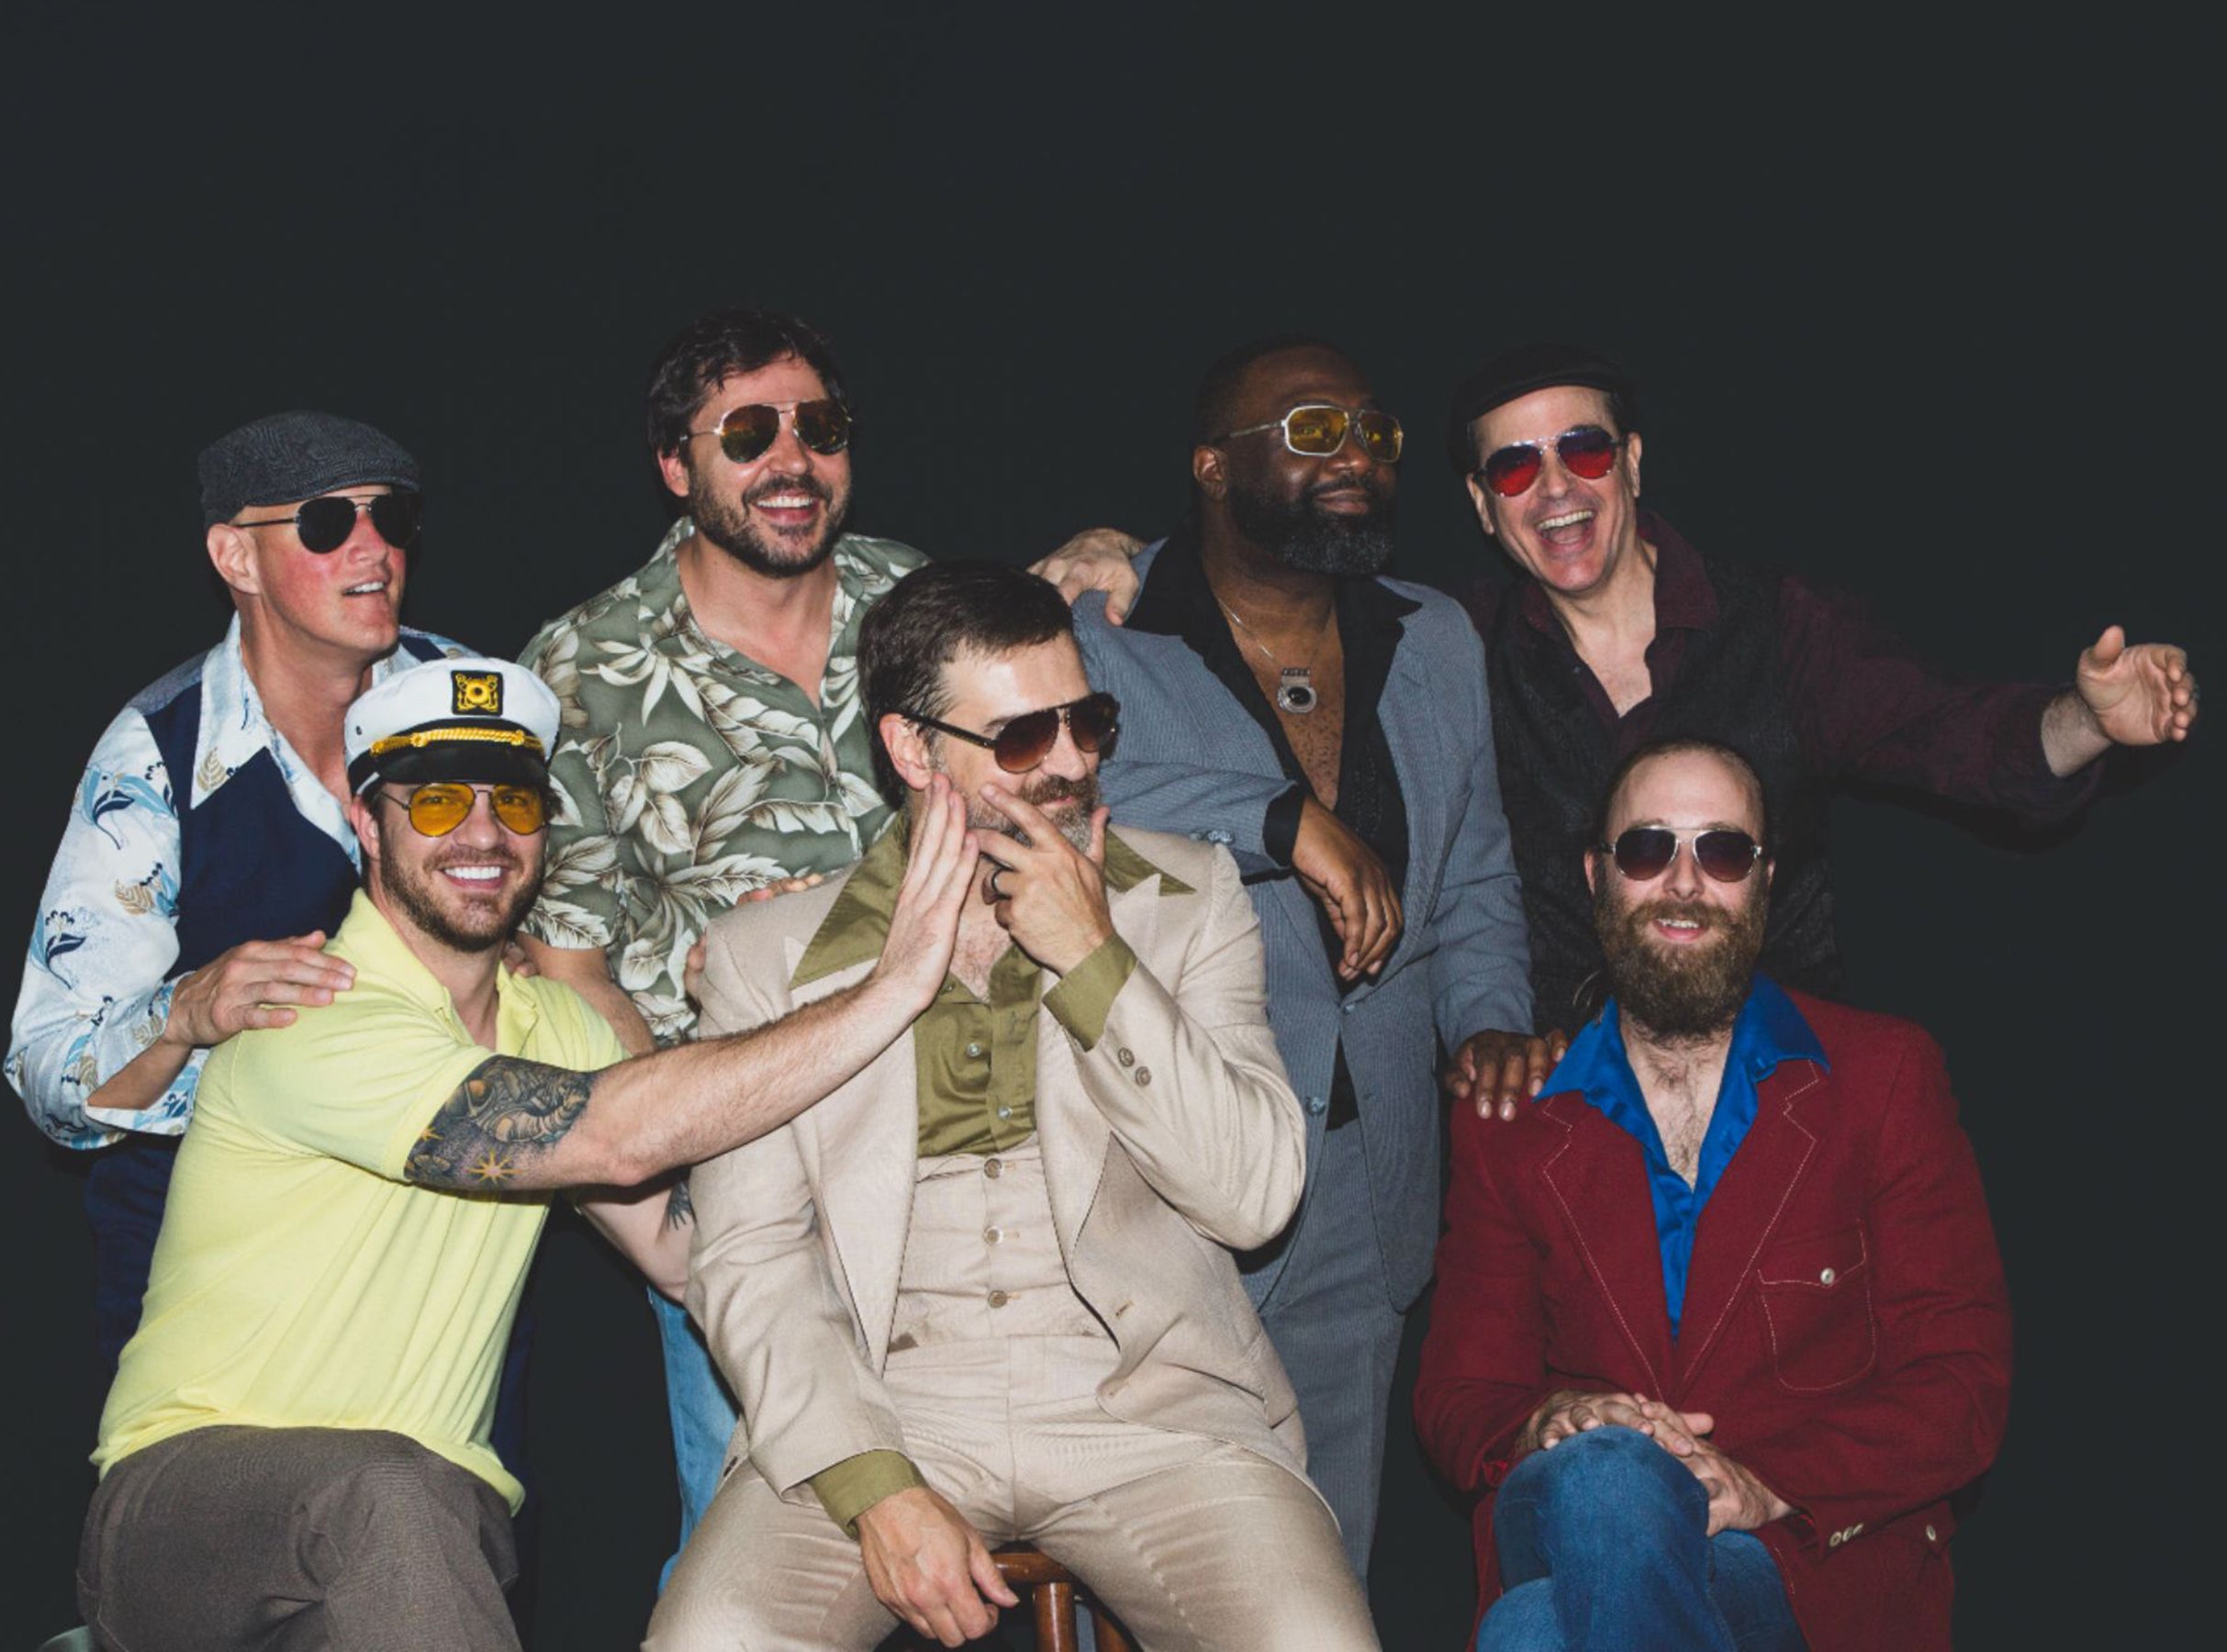 new presale code for Yacht Rock Schooner face value tickets in Portsmouth